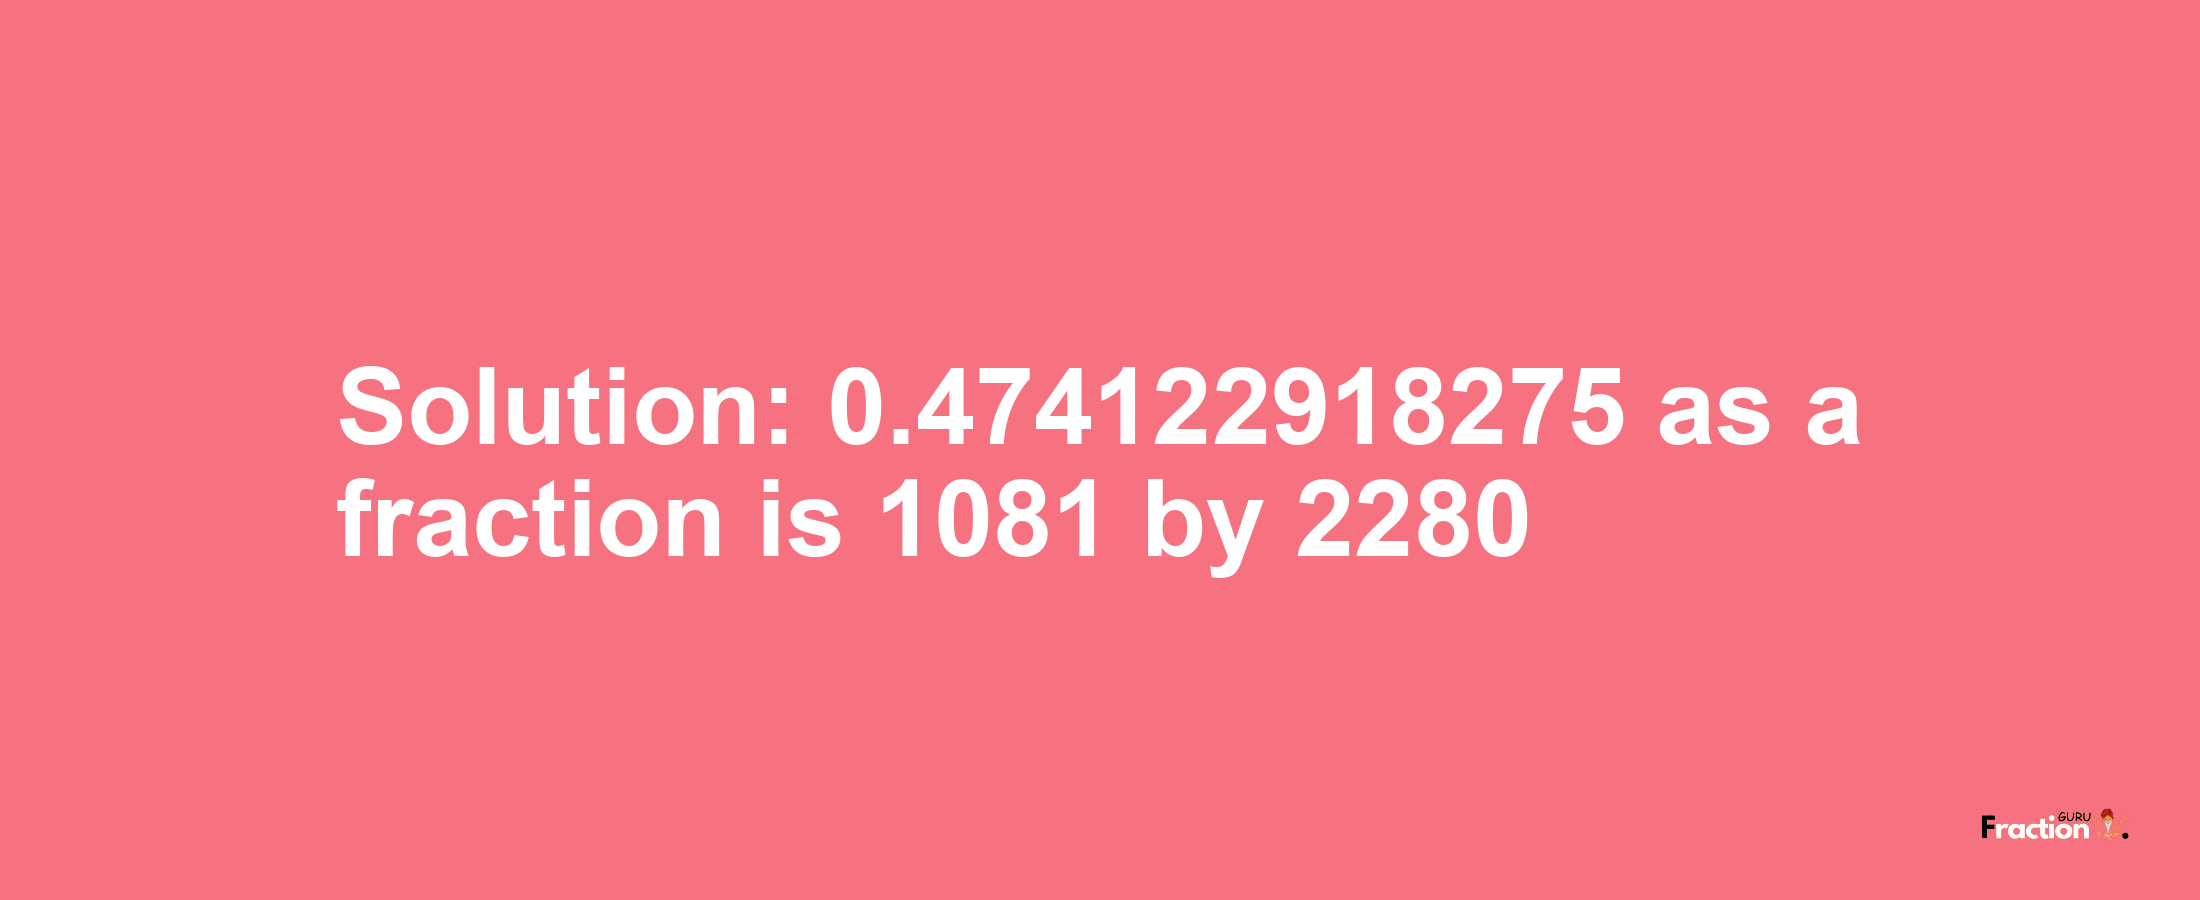 Solution:0.474122918275 as a fraction is 1081/2280